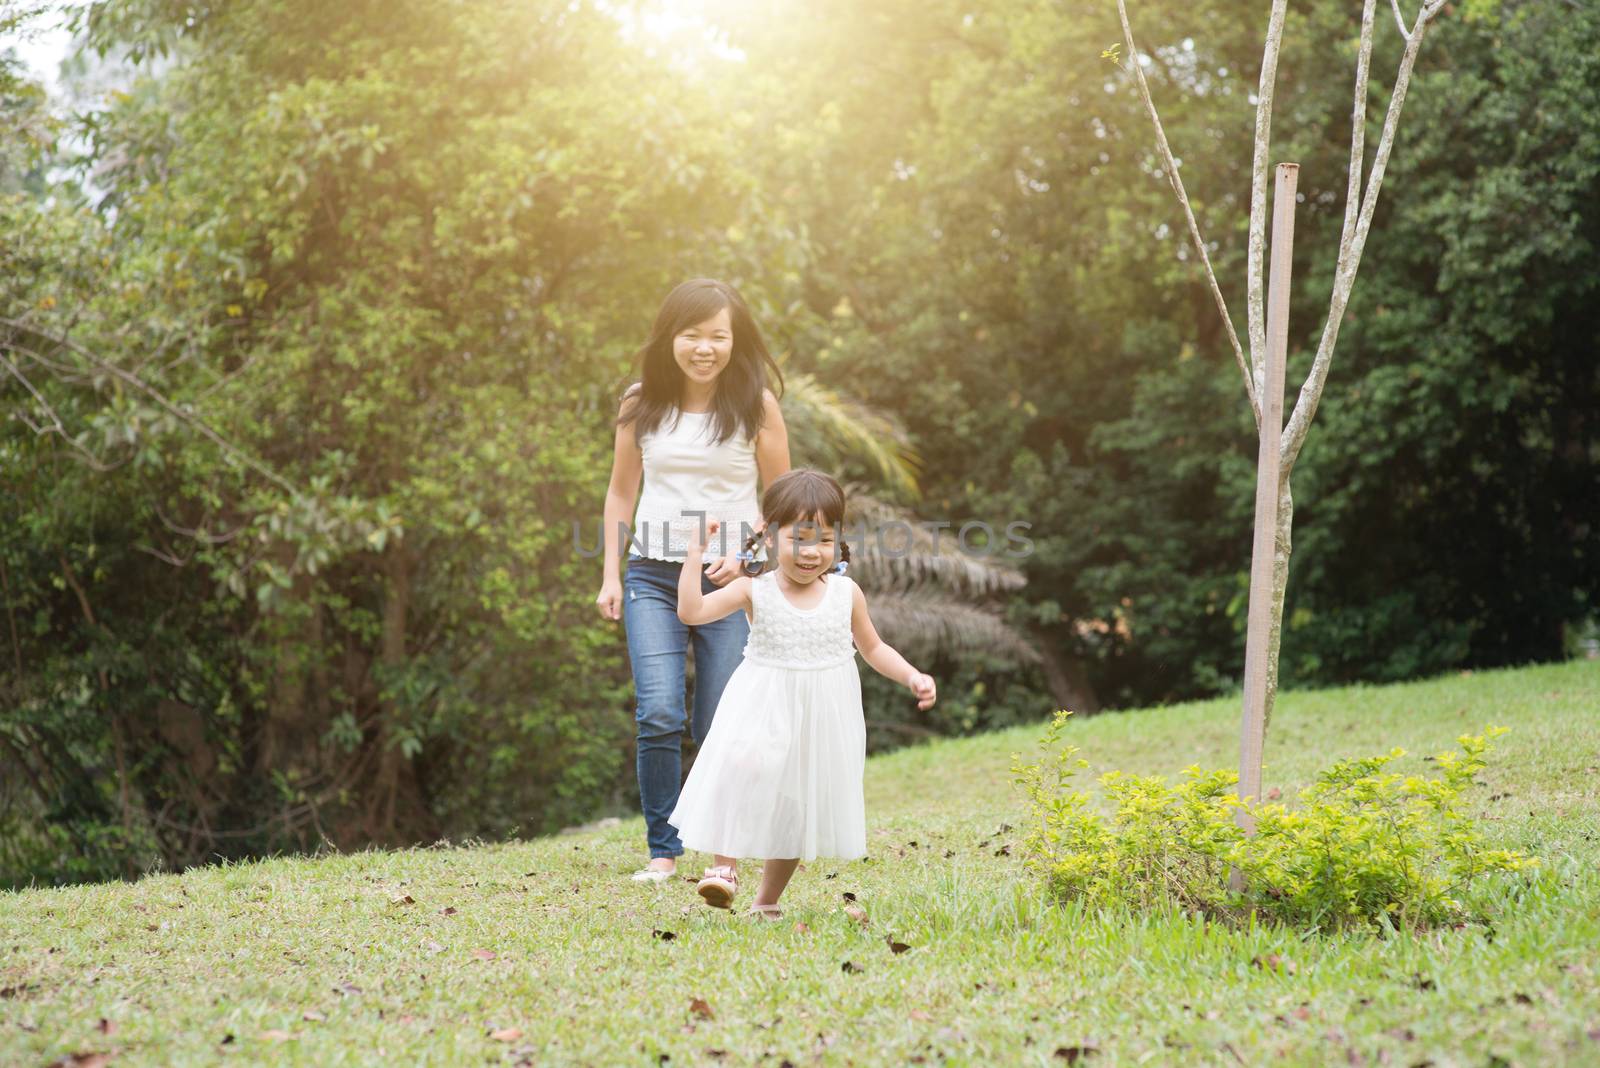 Mother and little girl play chasing at green park. Asian family outdoors activity.